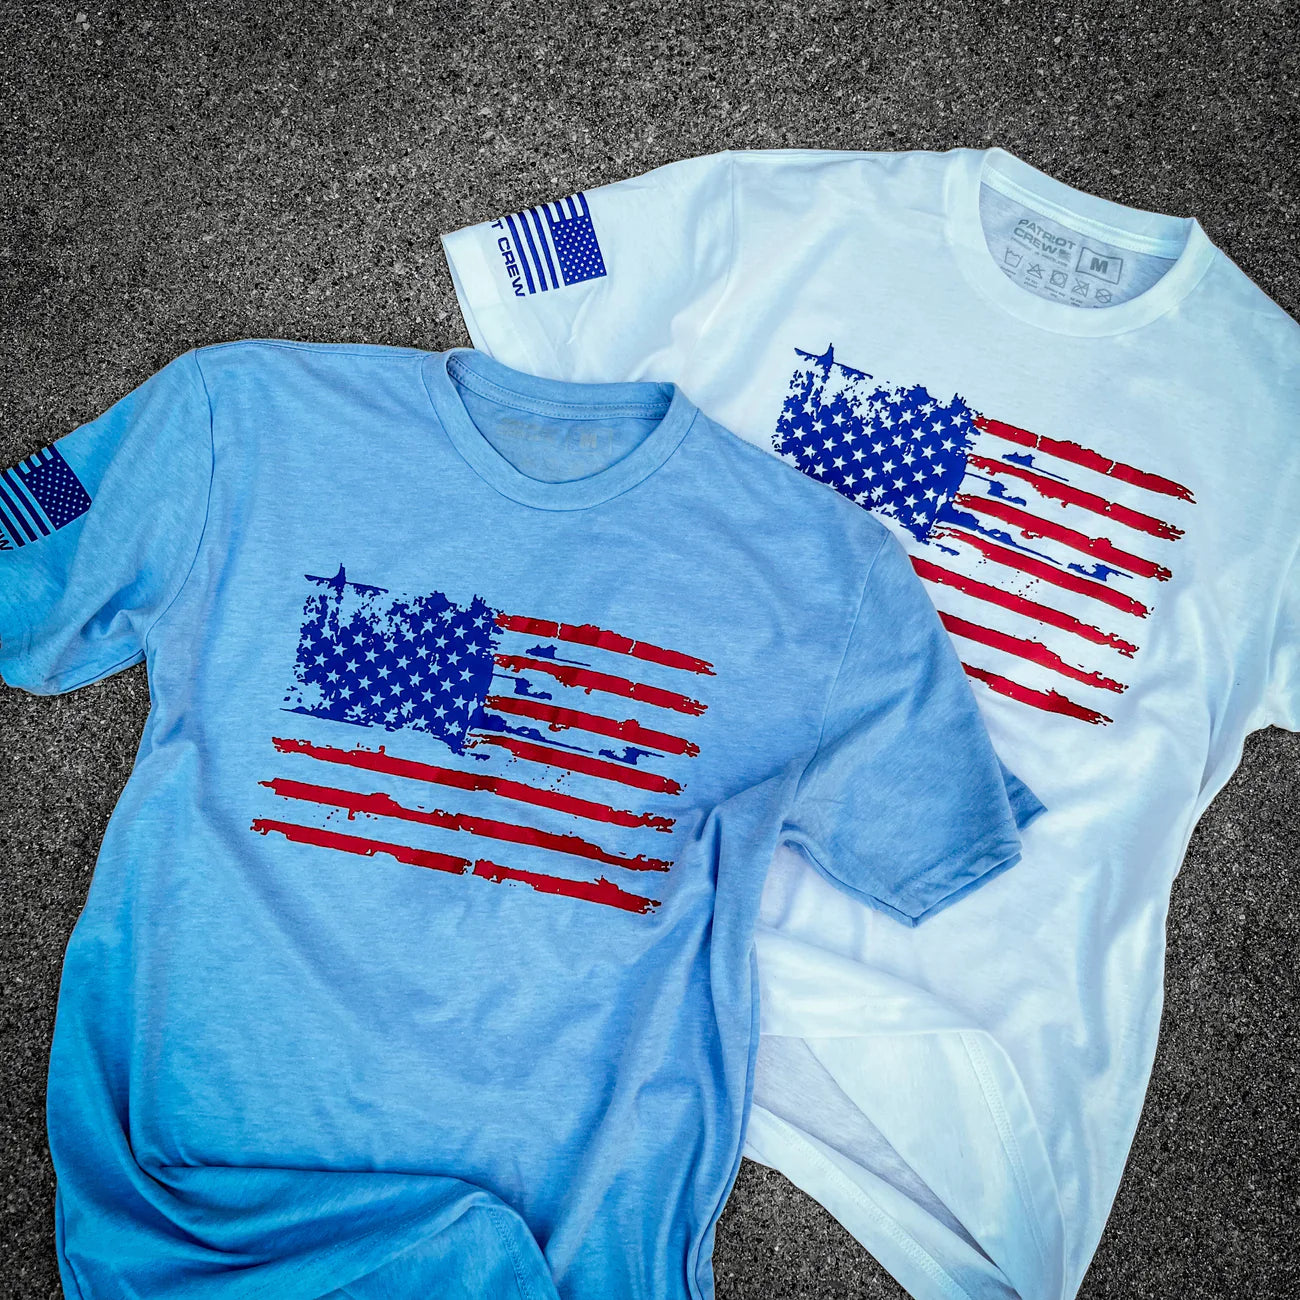 Where to Buy Patriotic Shirts